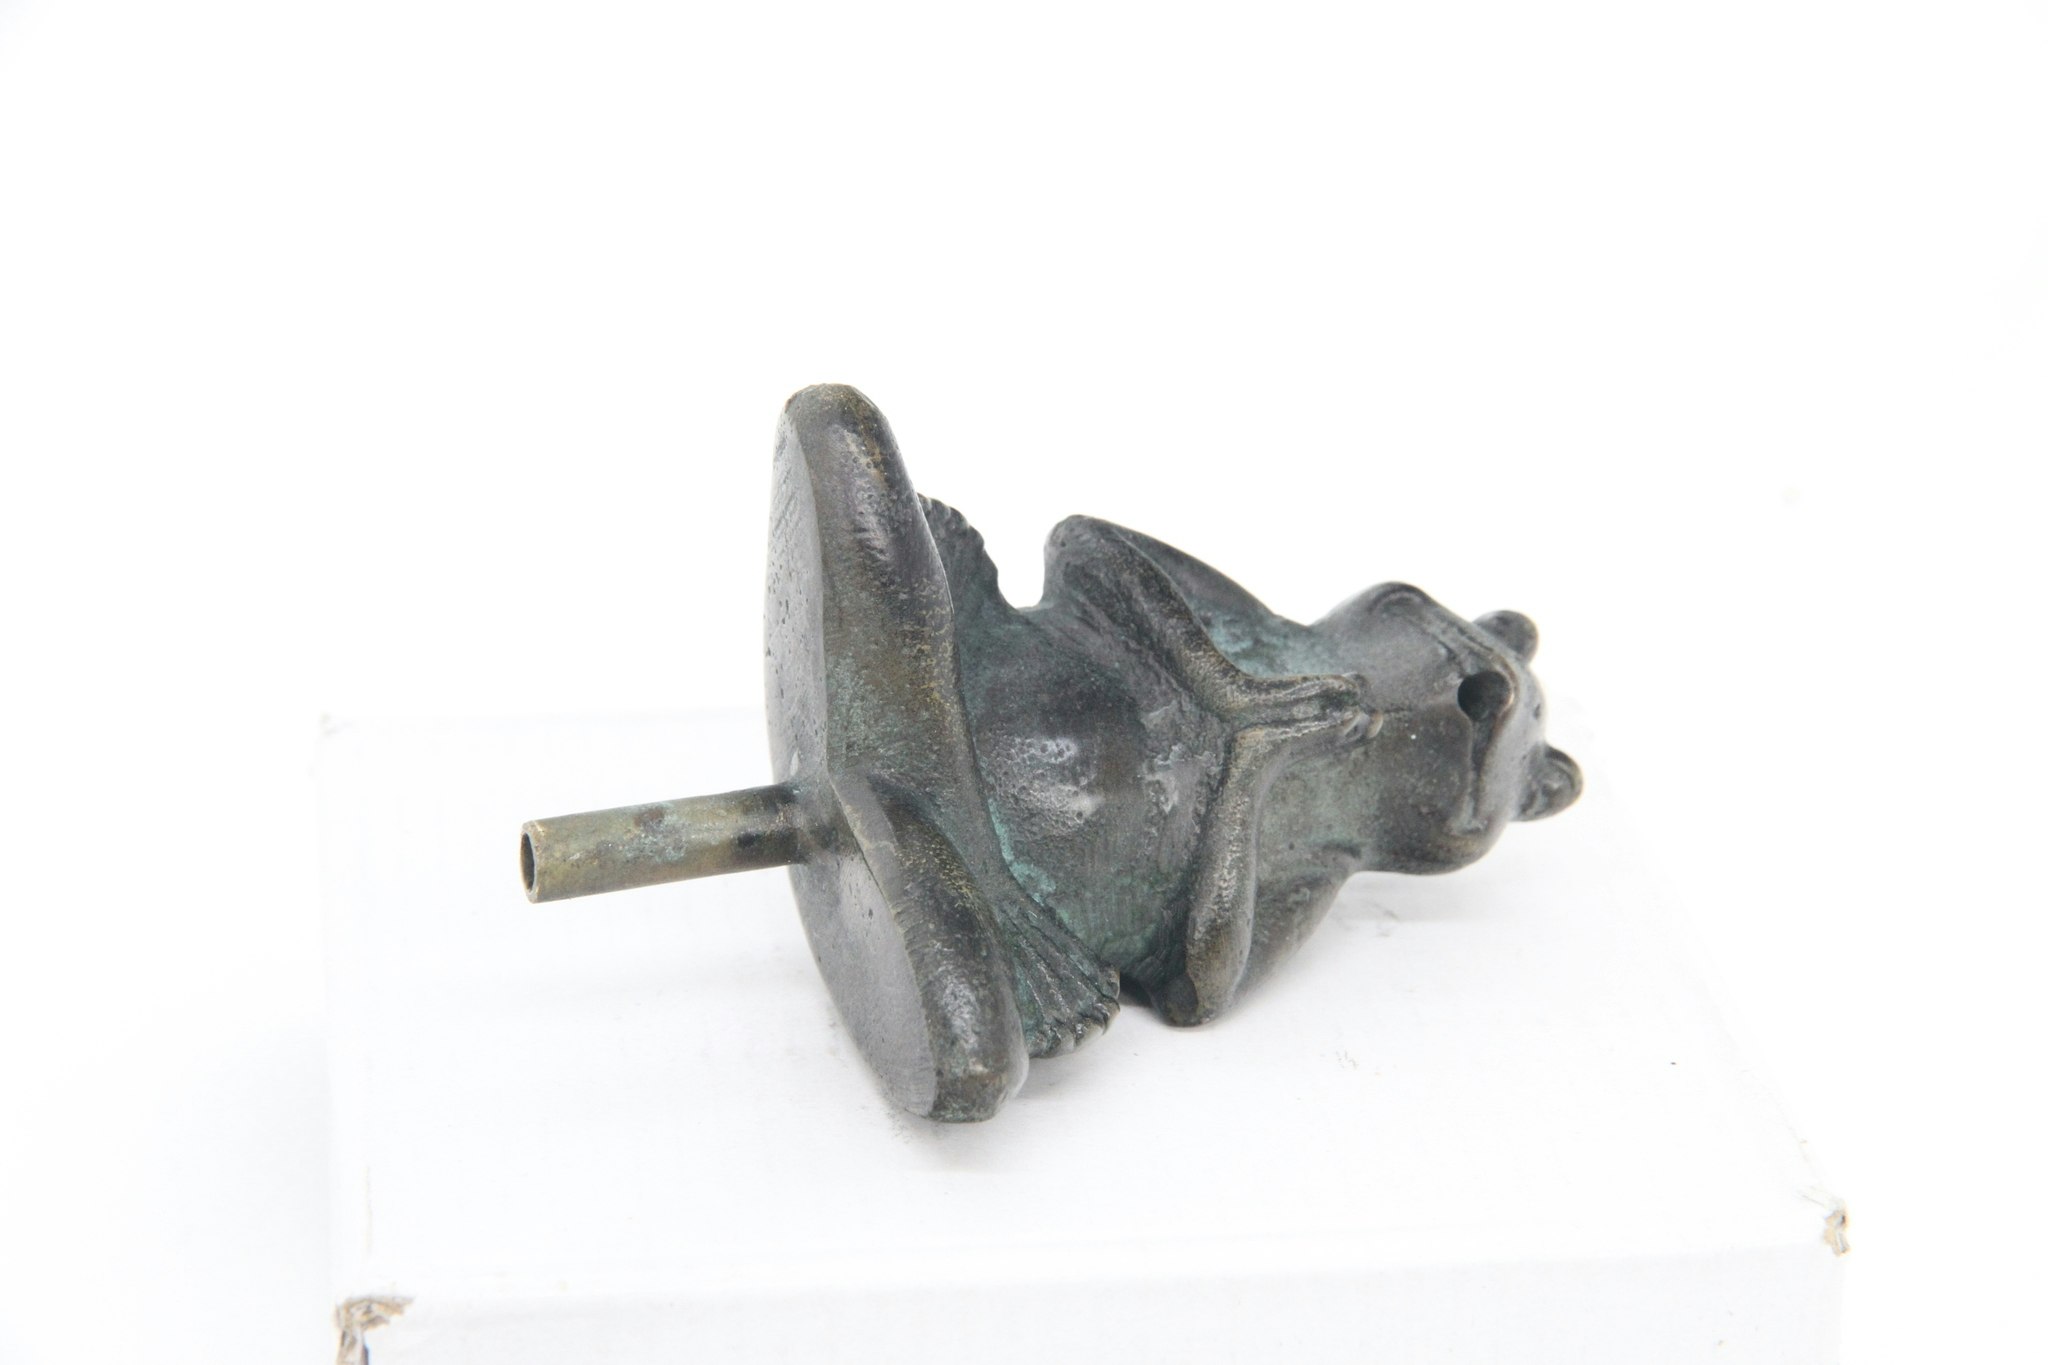 Seated frog as a fountain in a yoga position, 6.5 cm high, made of bronze